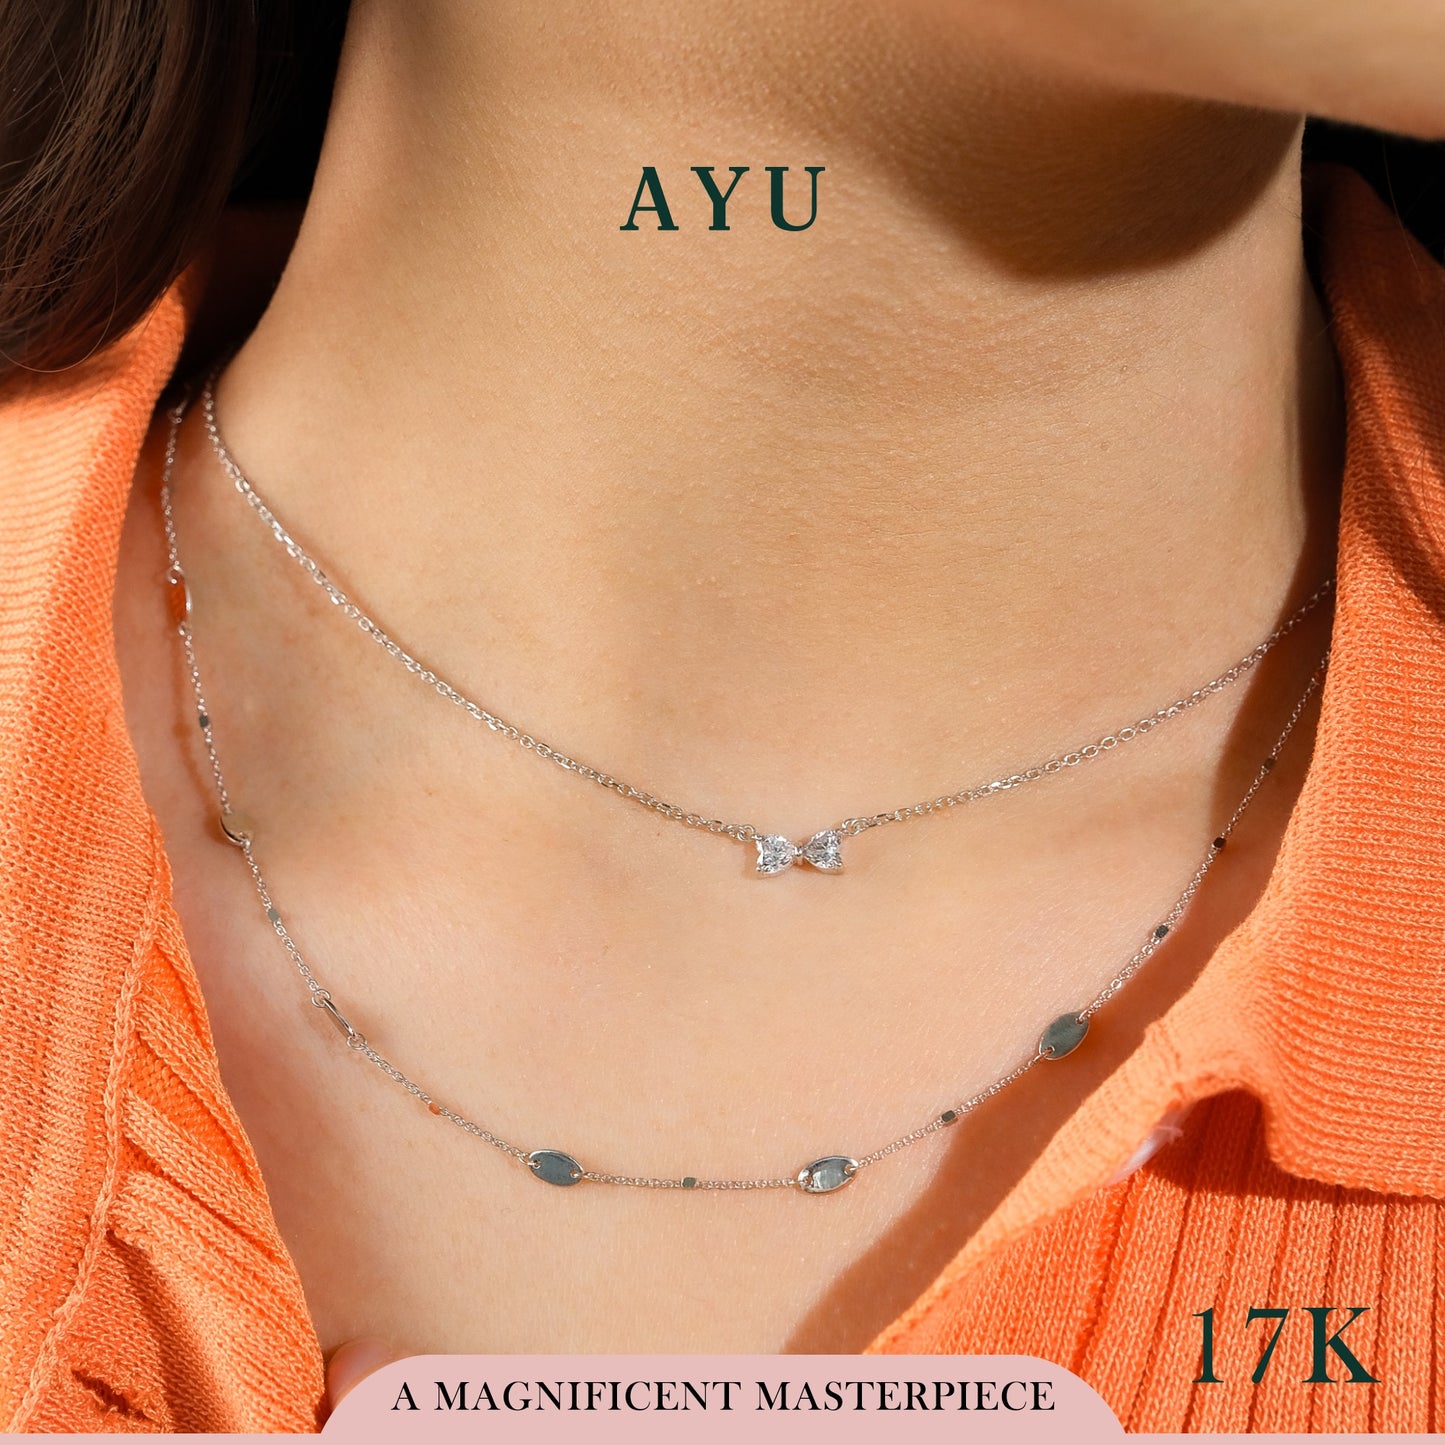 AYU Gold Oval With Bling Beads Chain Necklace 17k Rose Gold